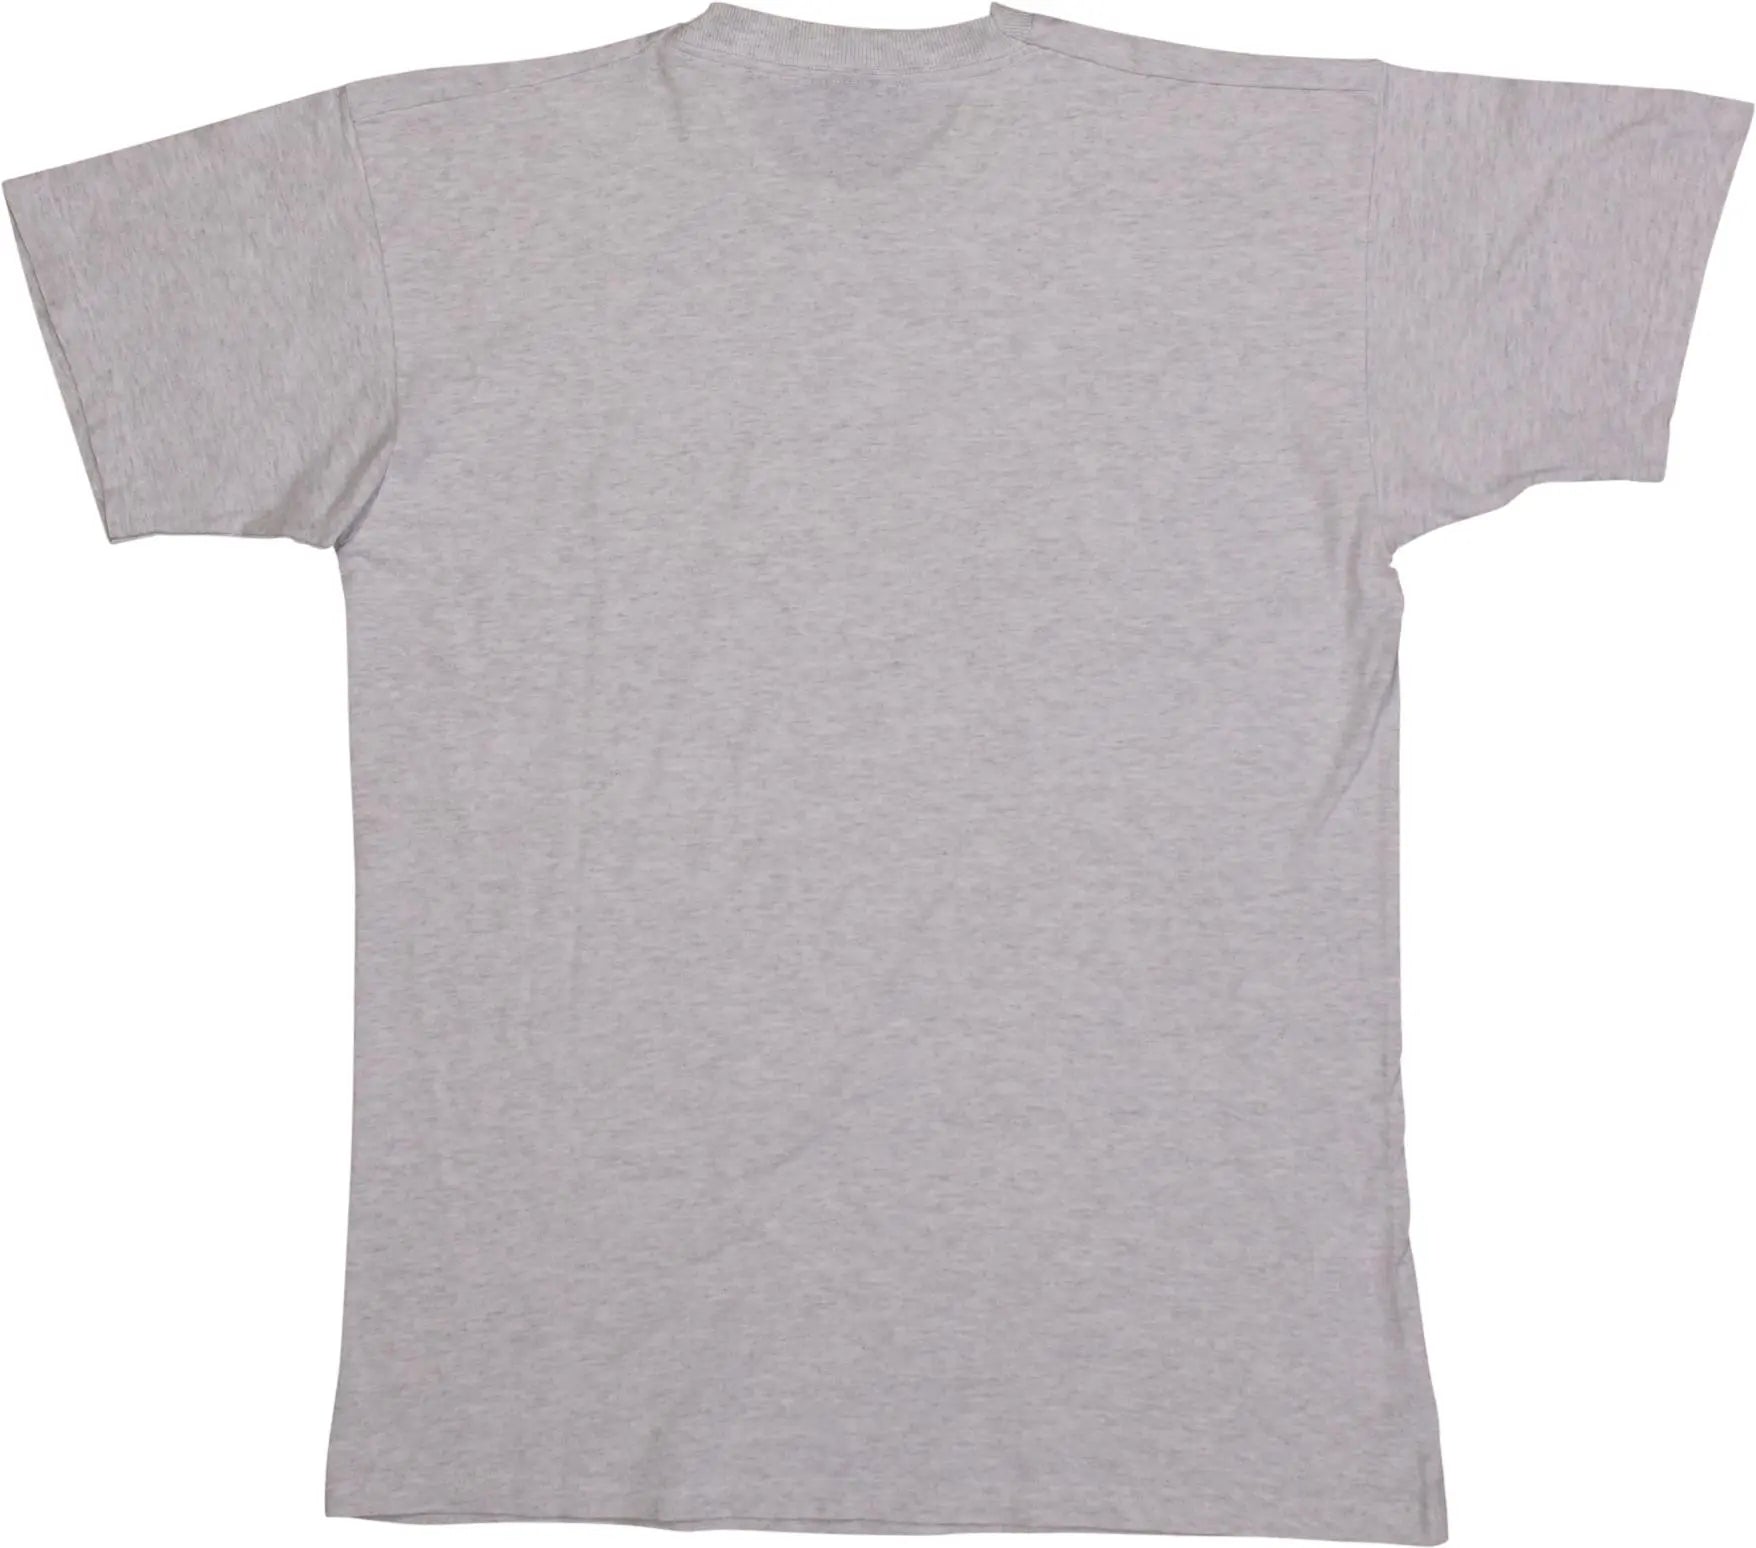 Kappa - Grey T-shirt by Kappa- ThriftTale.com - Vintage and second handclothing